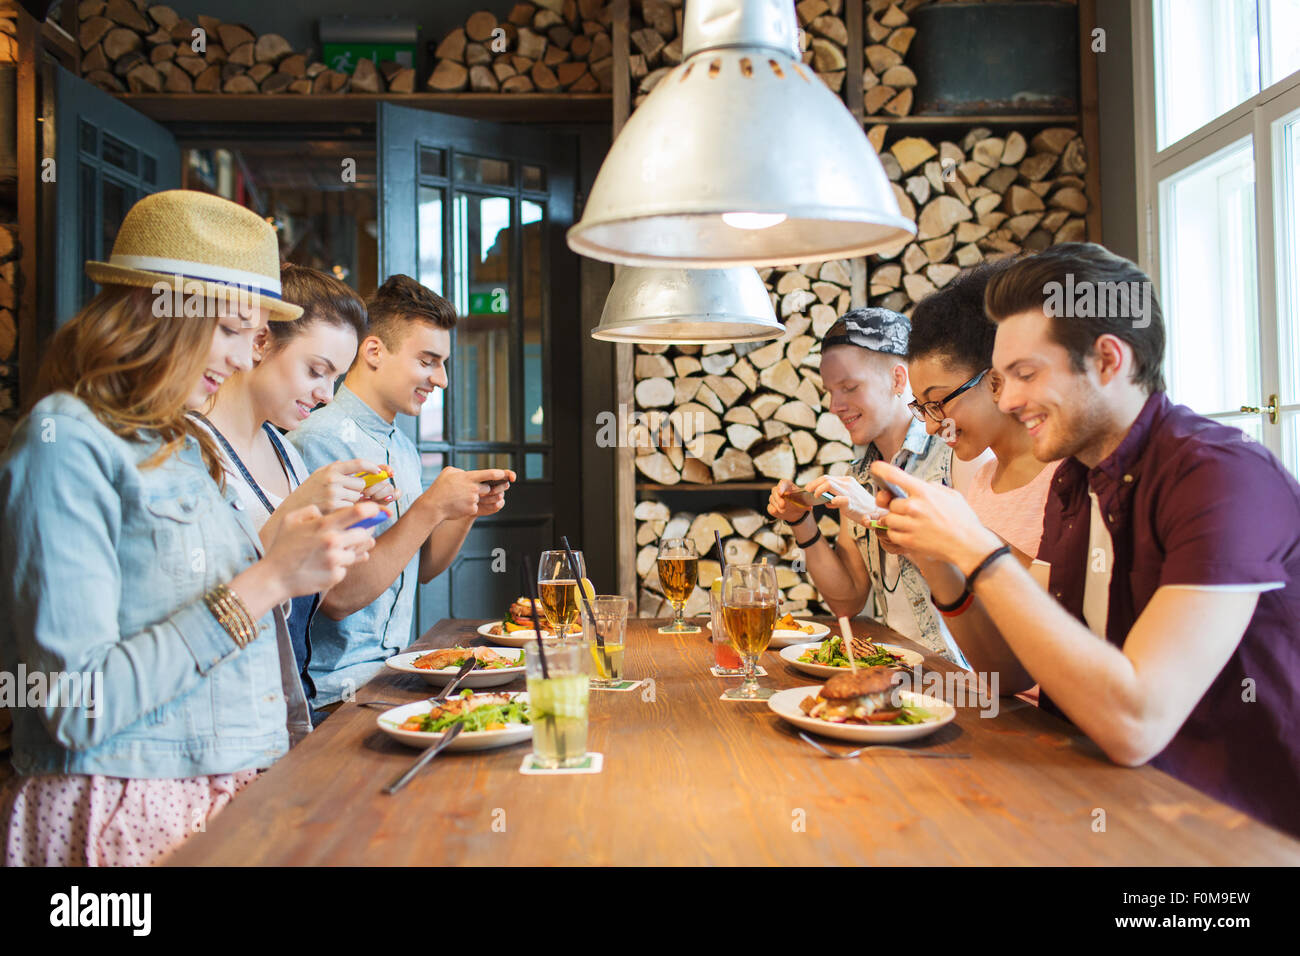 happy friends with smartphones picturing food Stock Photo